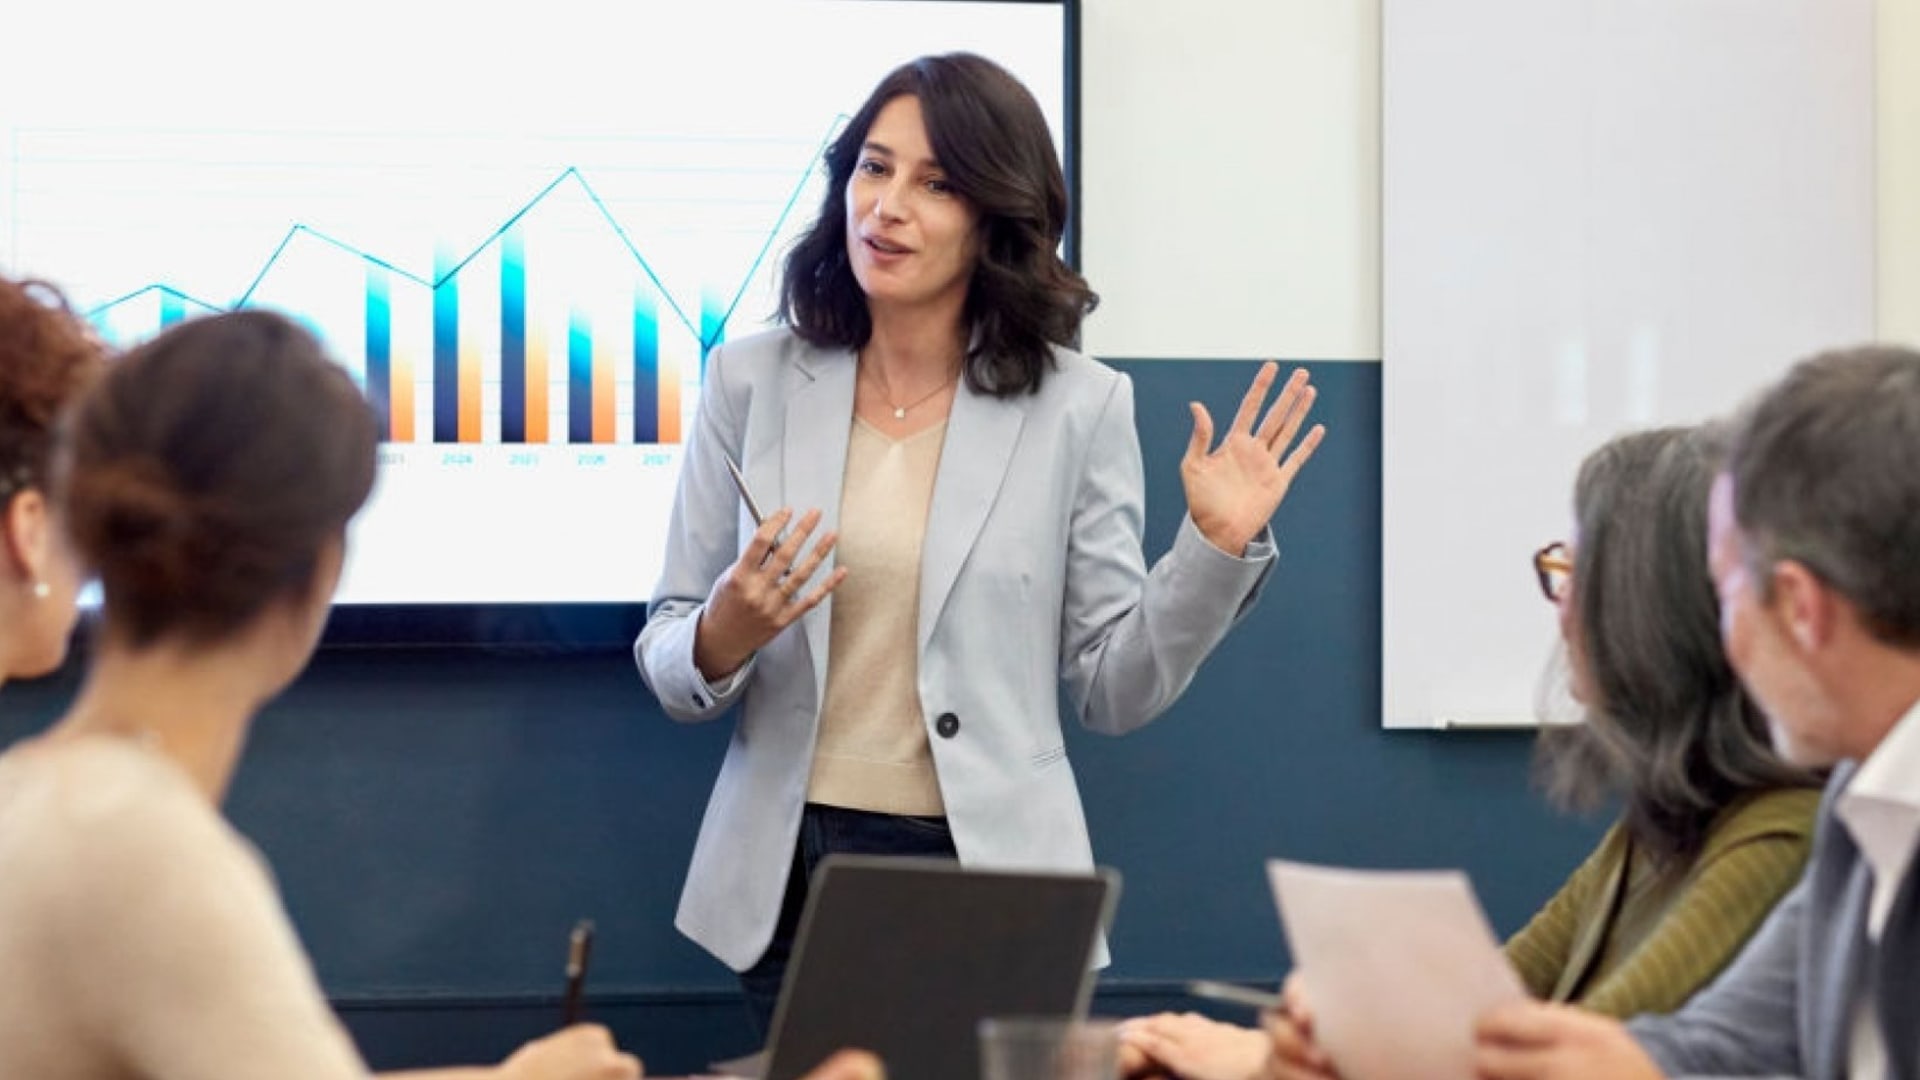 Want to Give a Better Presentation to Investors? Start With These 3 Tips